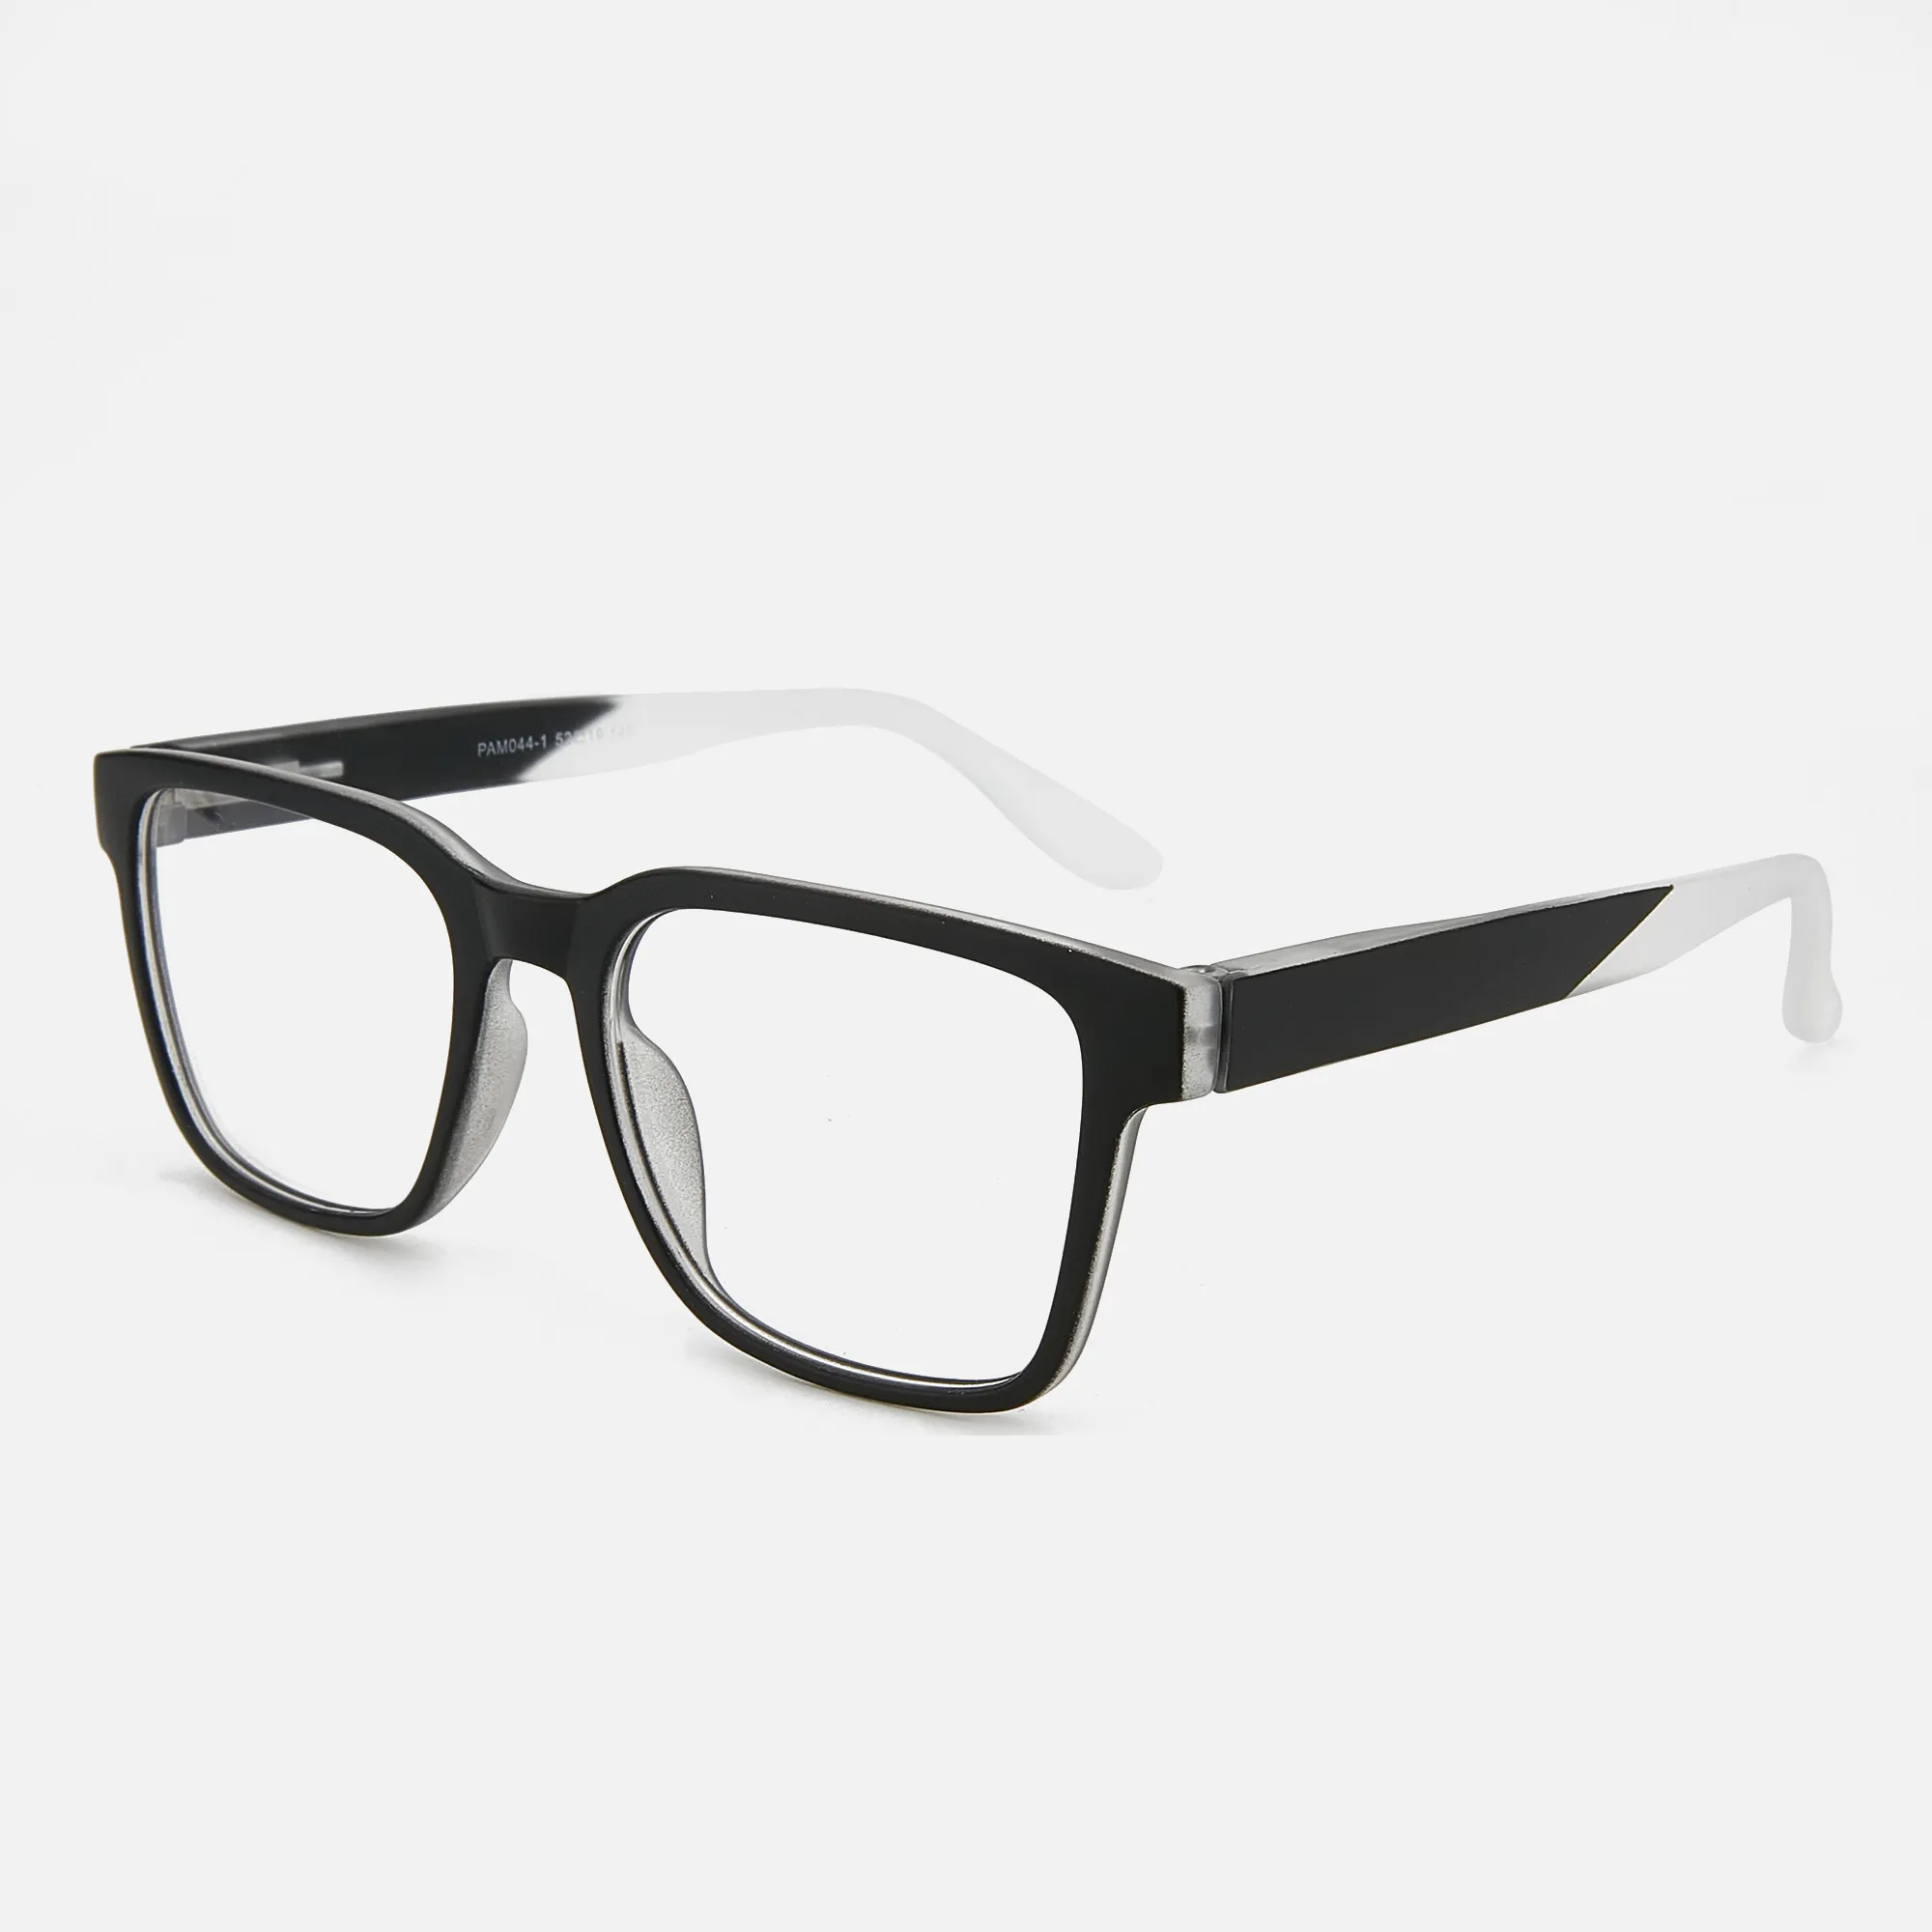 2022 Factory Direct Price Plastic Black Glasses Frame Clear Lens Square Eyewear For Optical Glasses